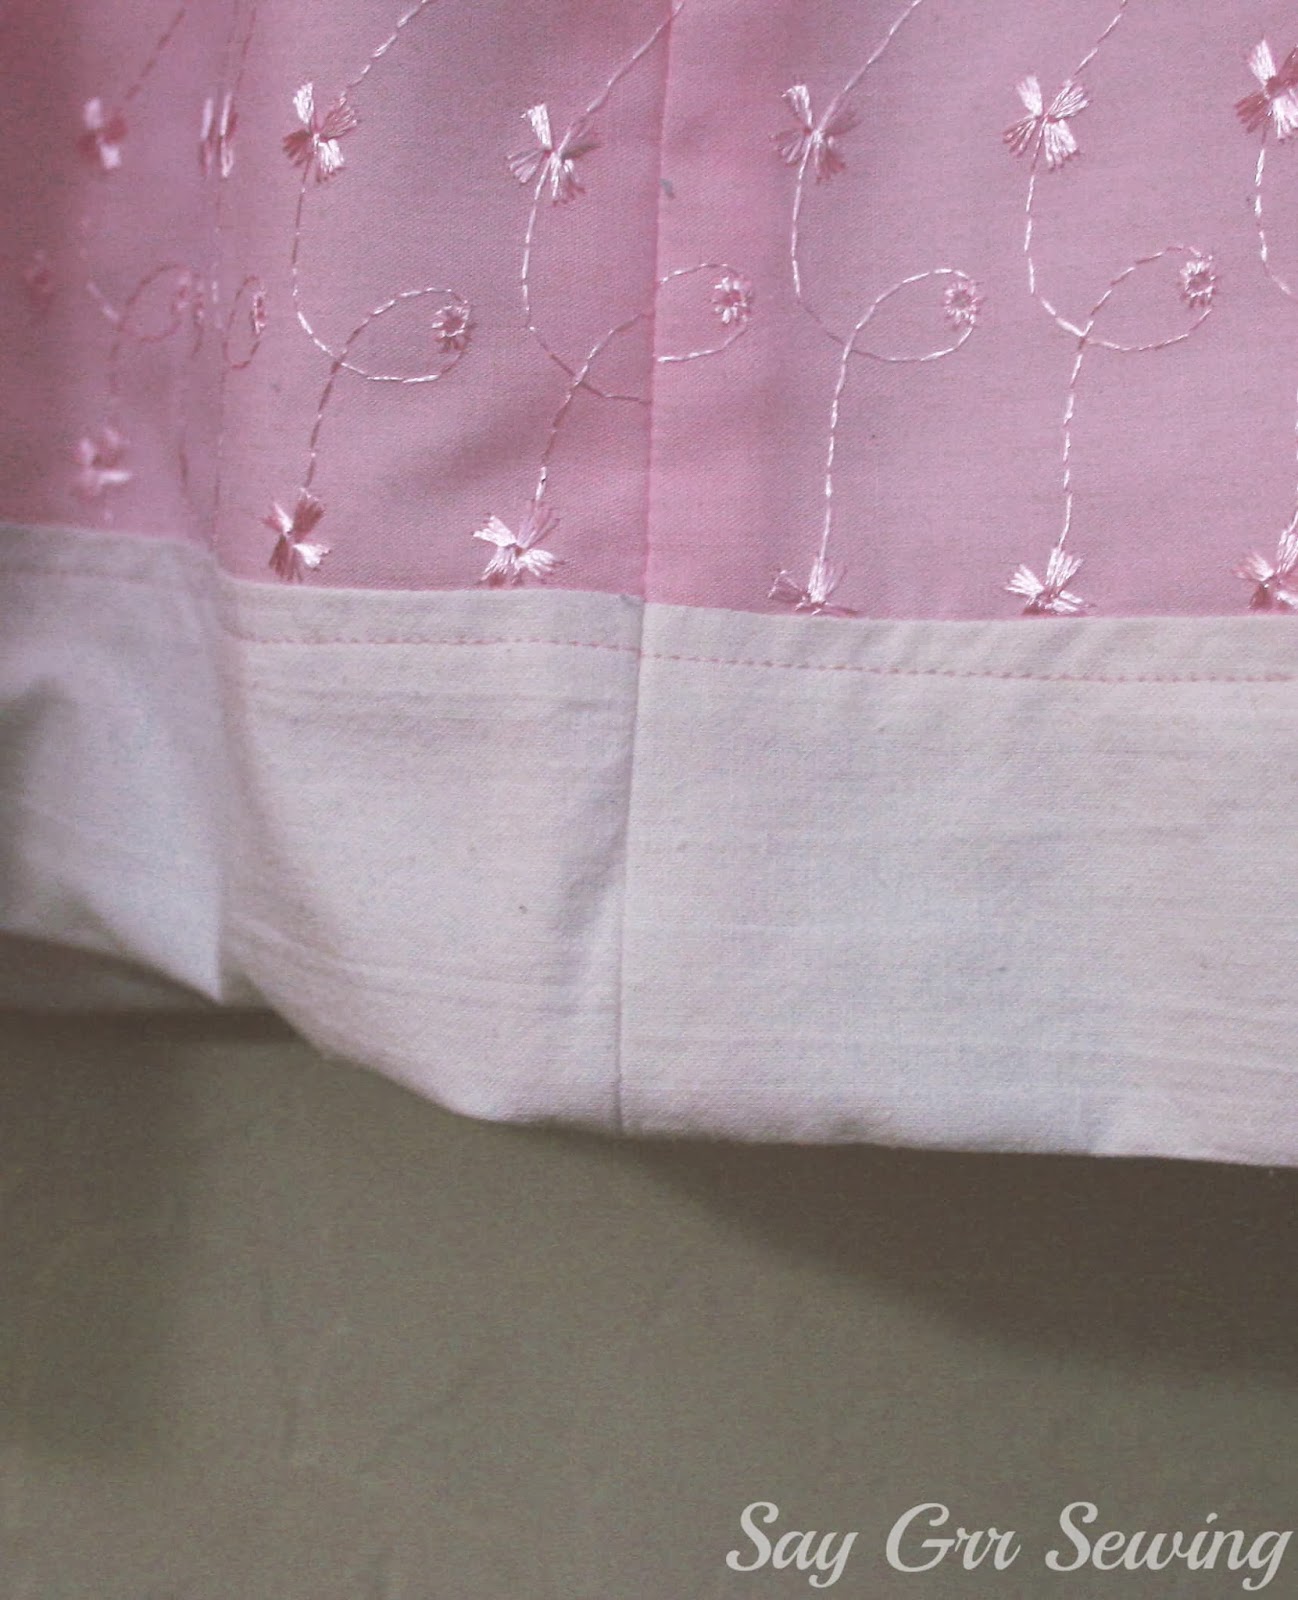 Say Grr Sewing: Pink Eyelet Dress And 4th Birthday